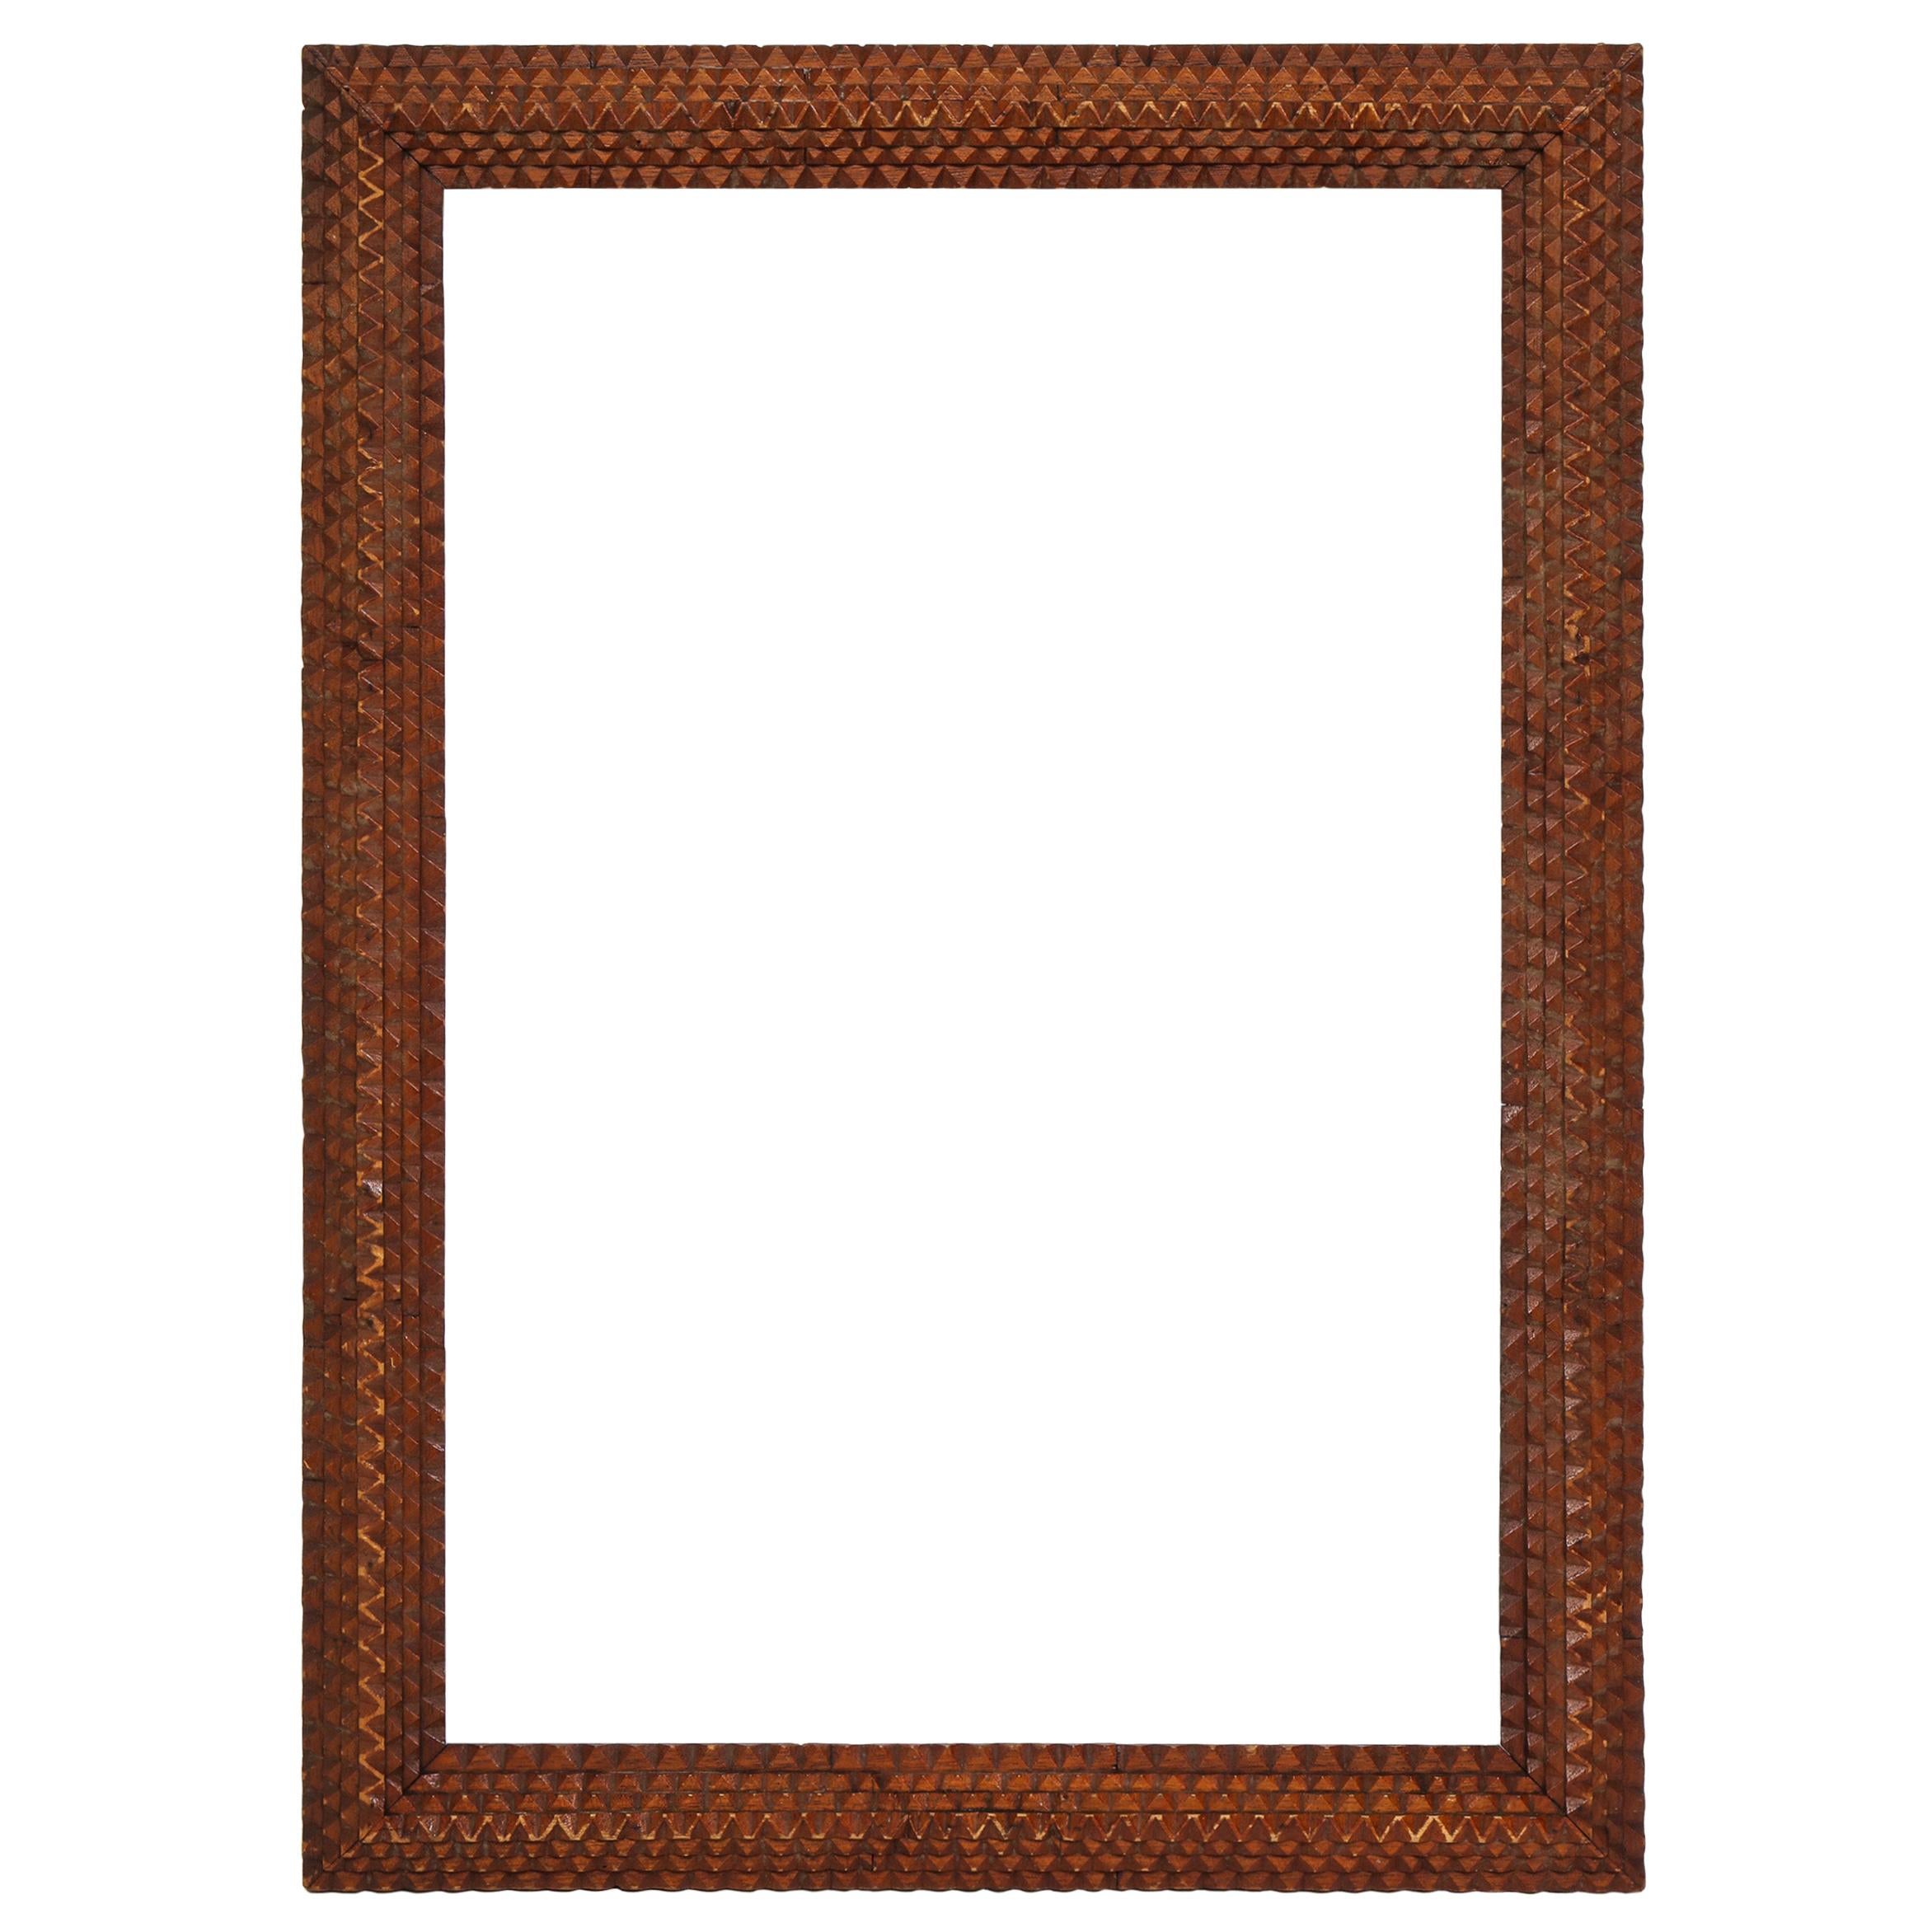 Early 20th Century Tramp Art Frame For Sale